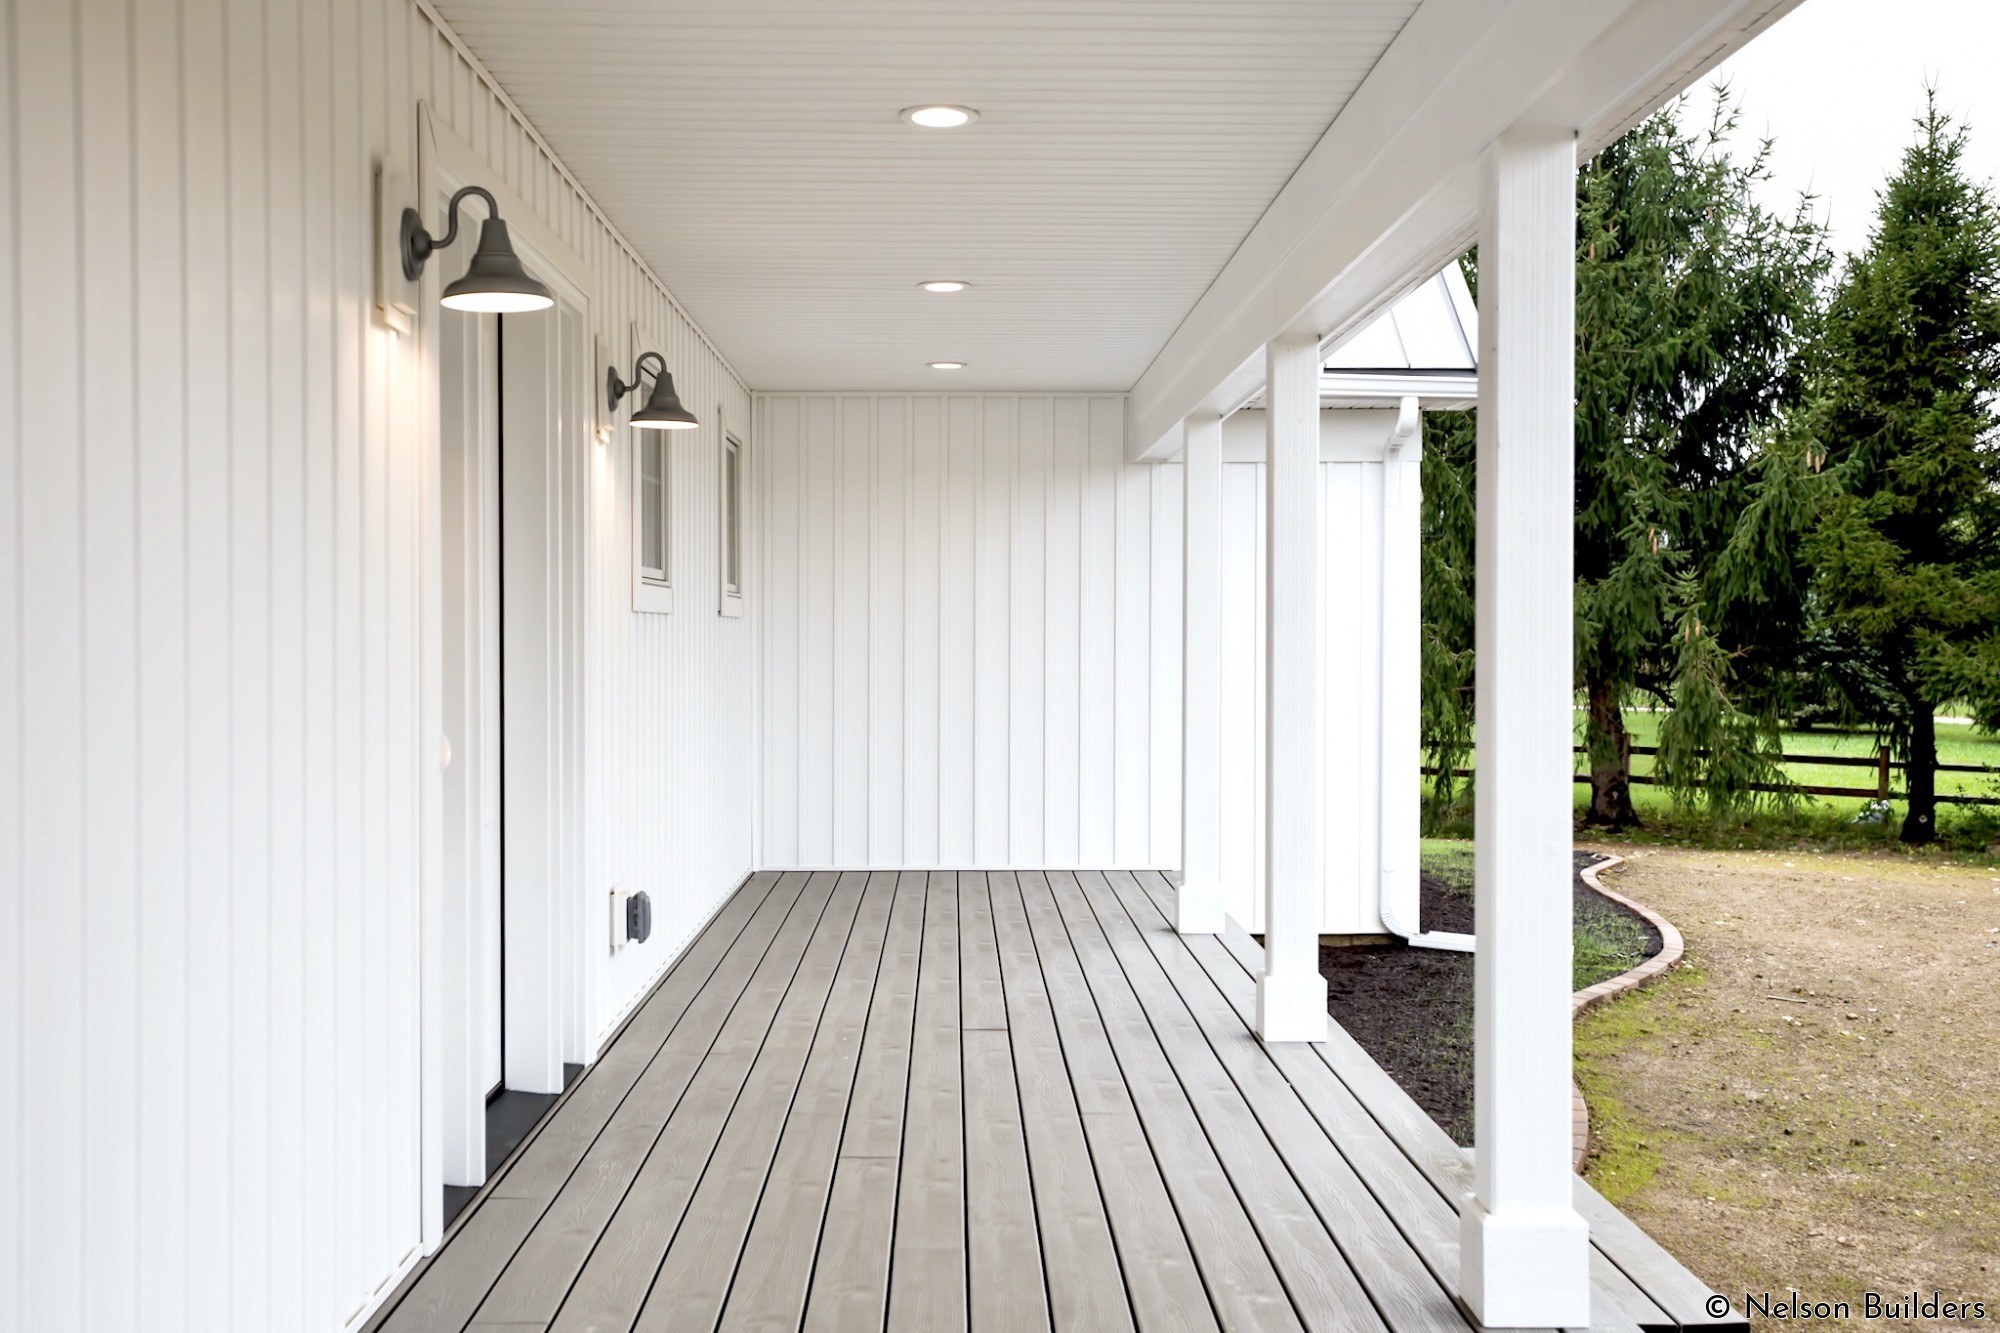 Sticking with the nature of the original home, the new farmhouse has a large wrap around deck to greet guests.